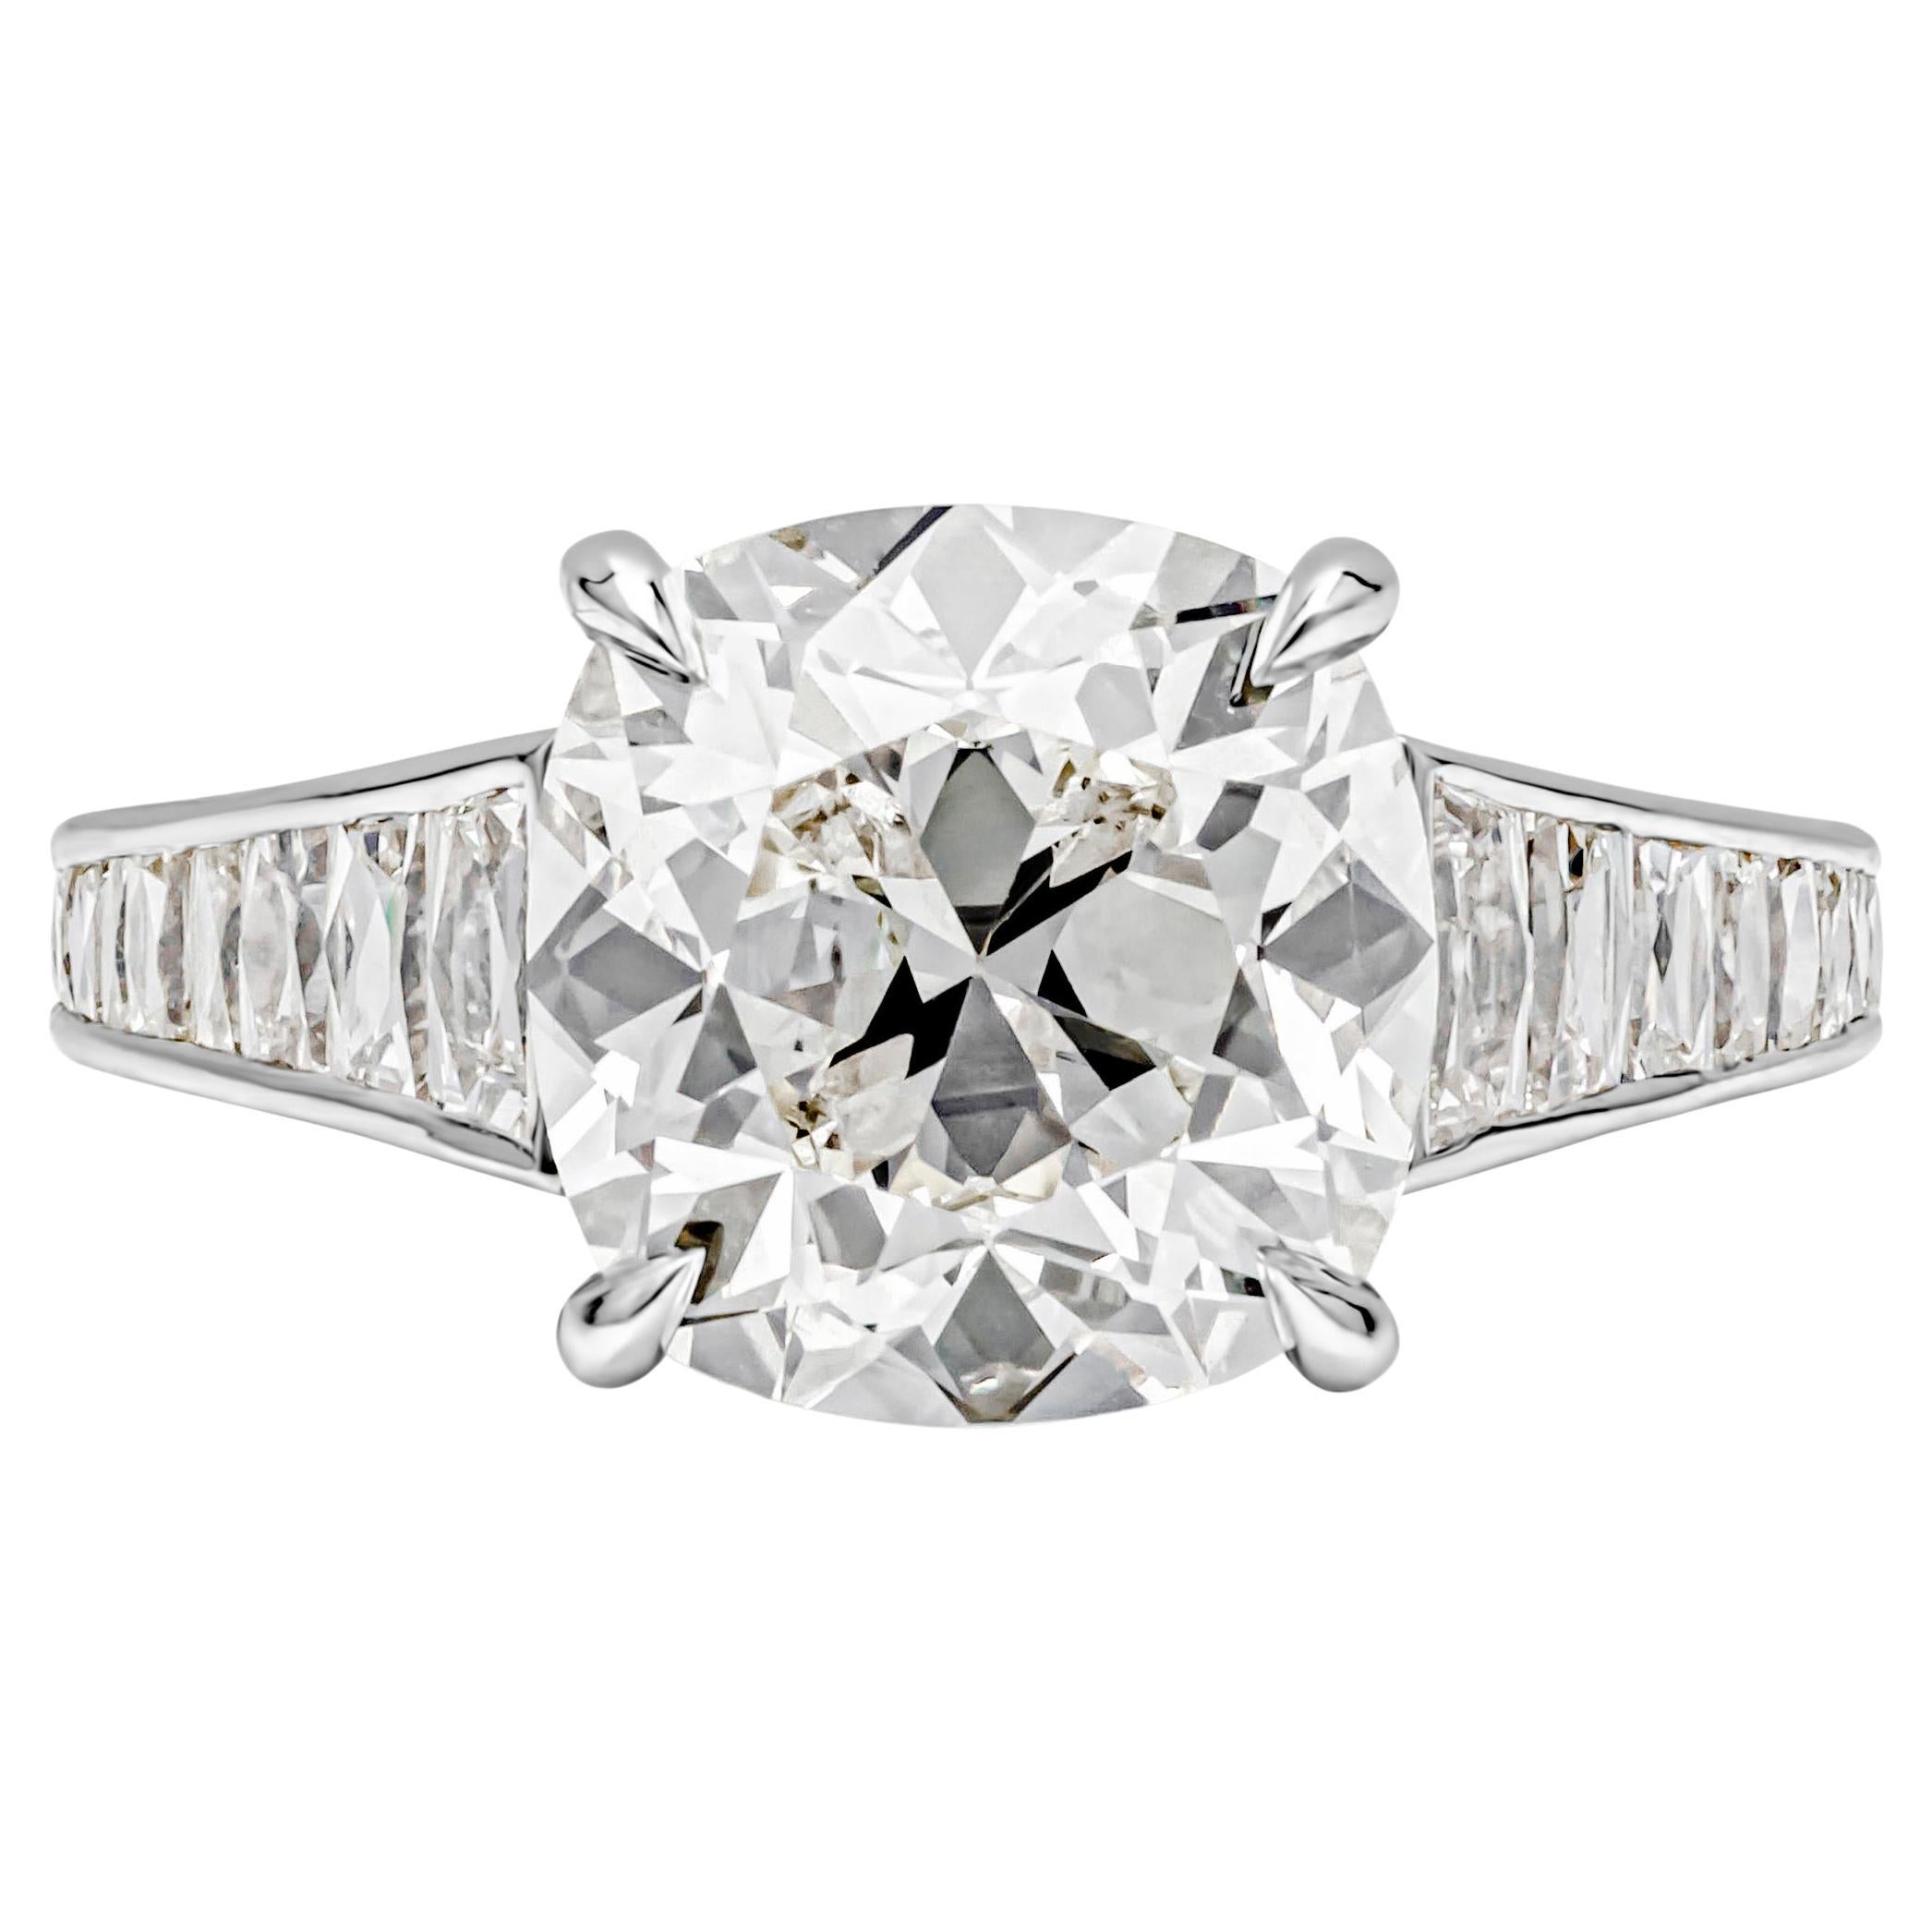 GIA Certified 5.42 Carats Cushion Cut Diamond Engagement Ring in Platinum